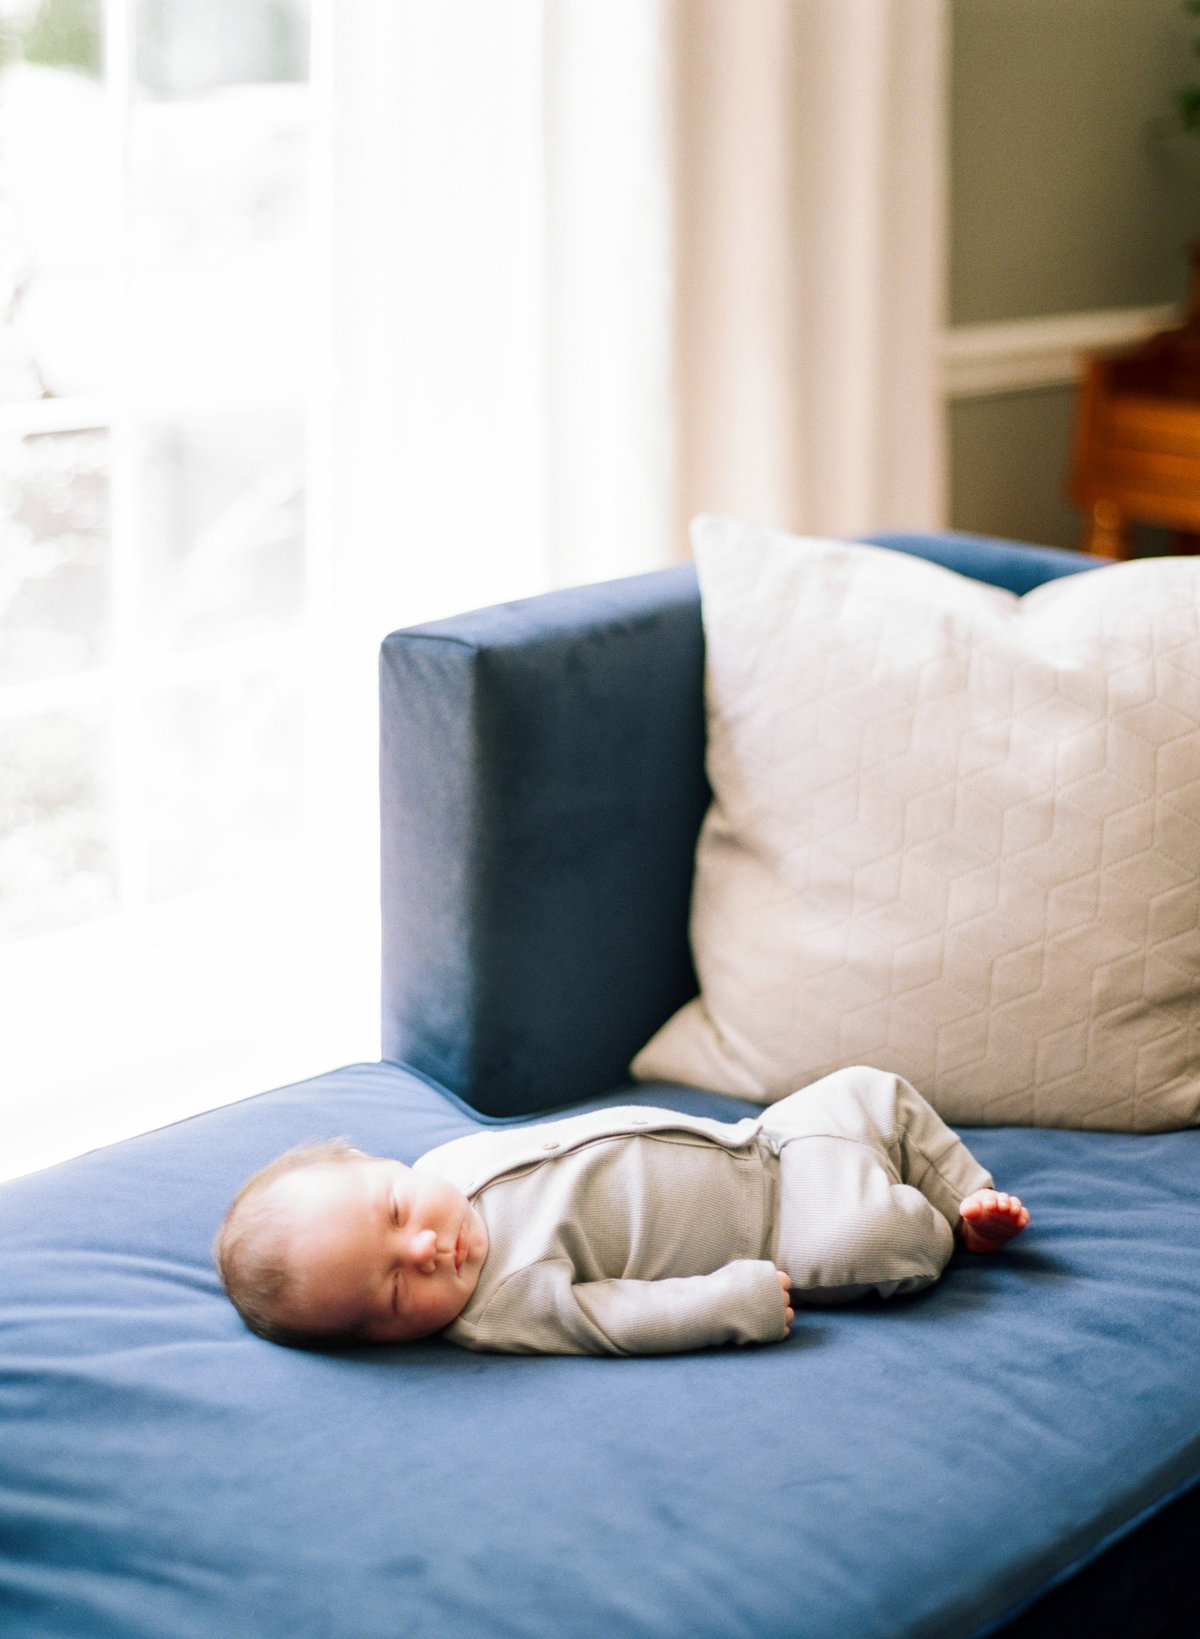 Baby lies on a blue couch fully relaxed and calm during a Raleigh newborn photography session. Photographed by Raleigh newborn photographers A.J. Dunlap Photography.